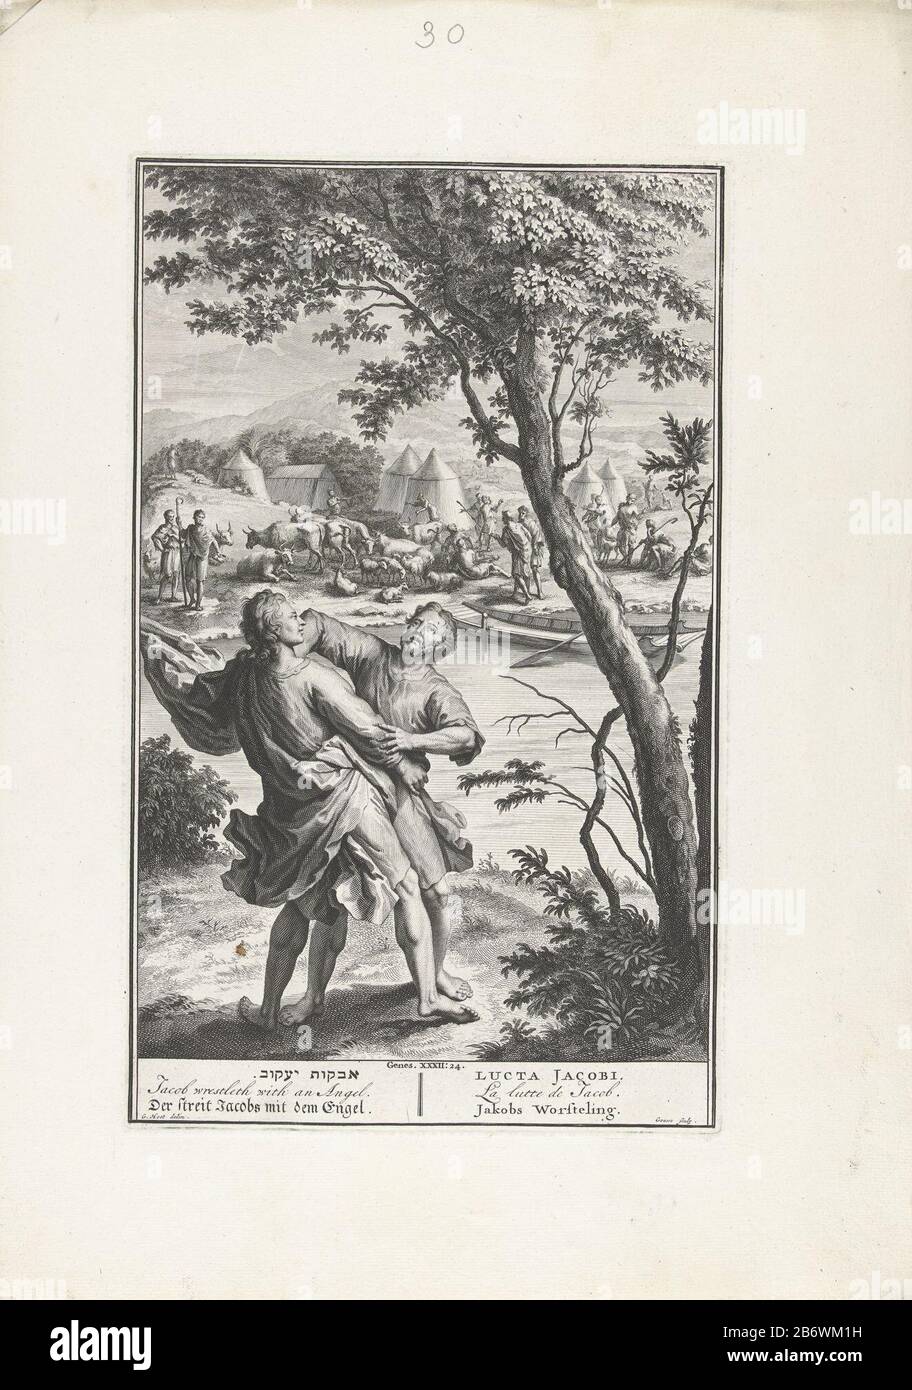 Jakob Worstelt Met De Engel Jacob Stands In The Foreground. He Wrestles  With An Angel. In The Background The River Jabbok Jacob And Fellow  Travelers (Gen. 32:24). The Print Has A Hebrew,